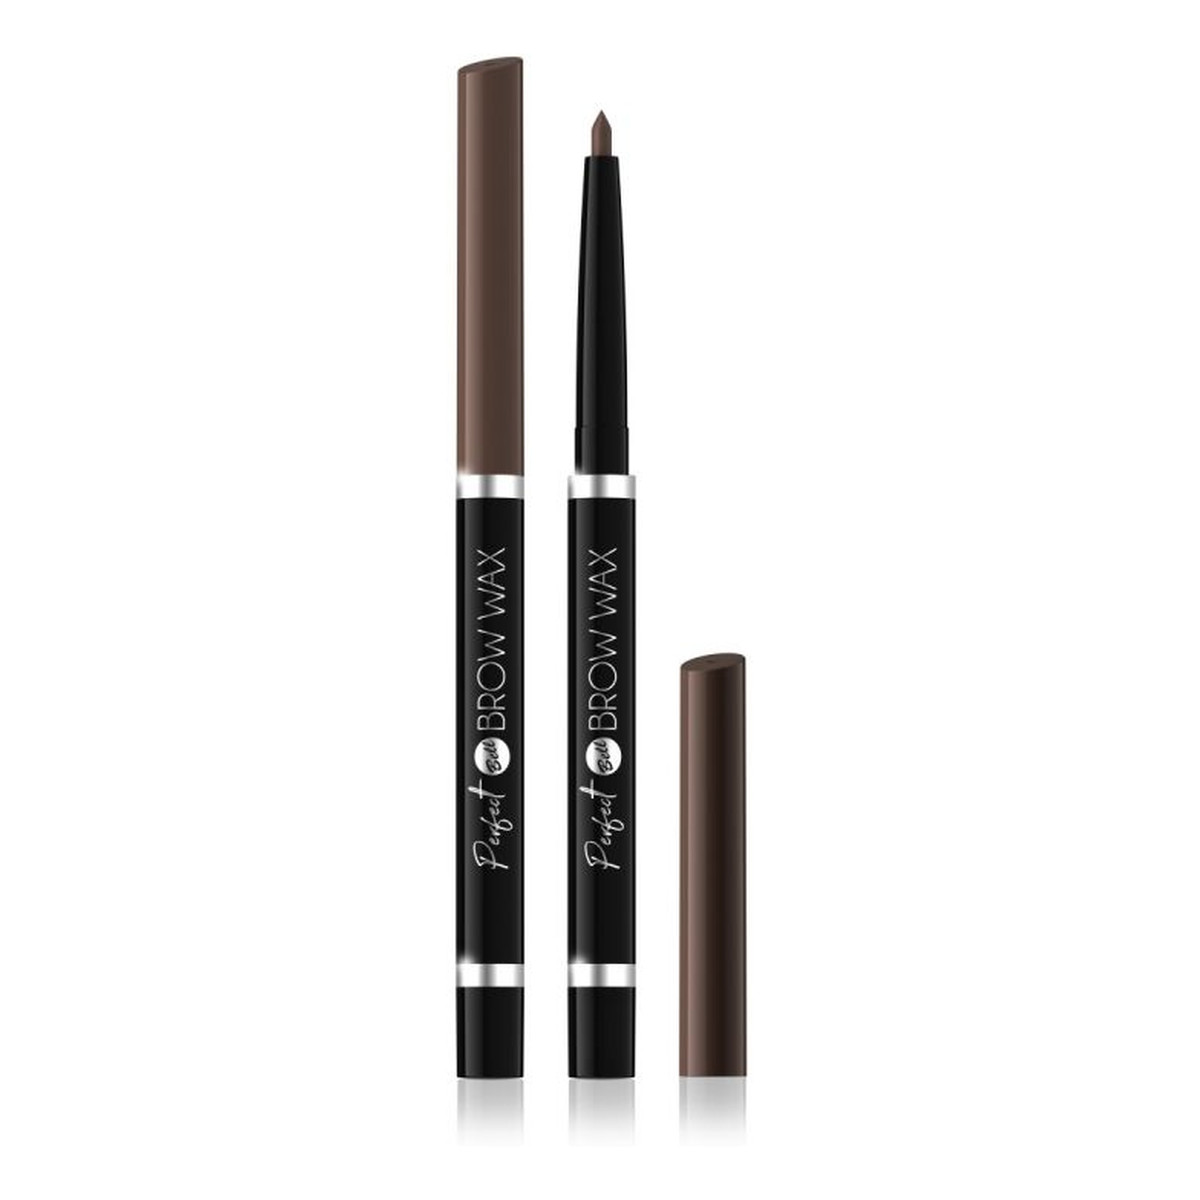 Bell Perfect Brow Wax Wosk do brwi 2